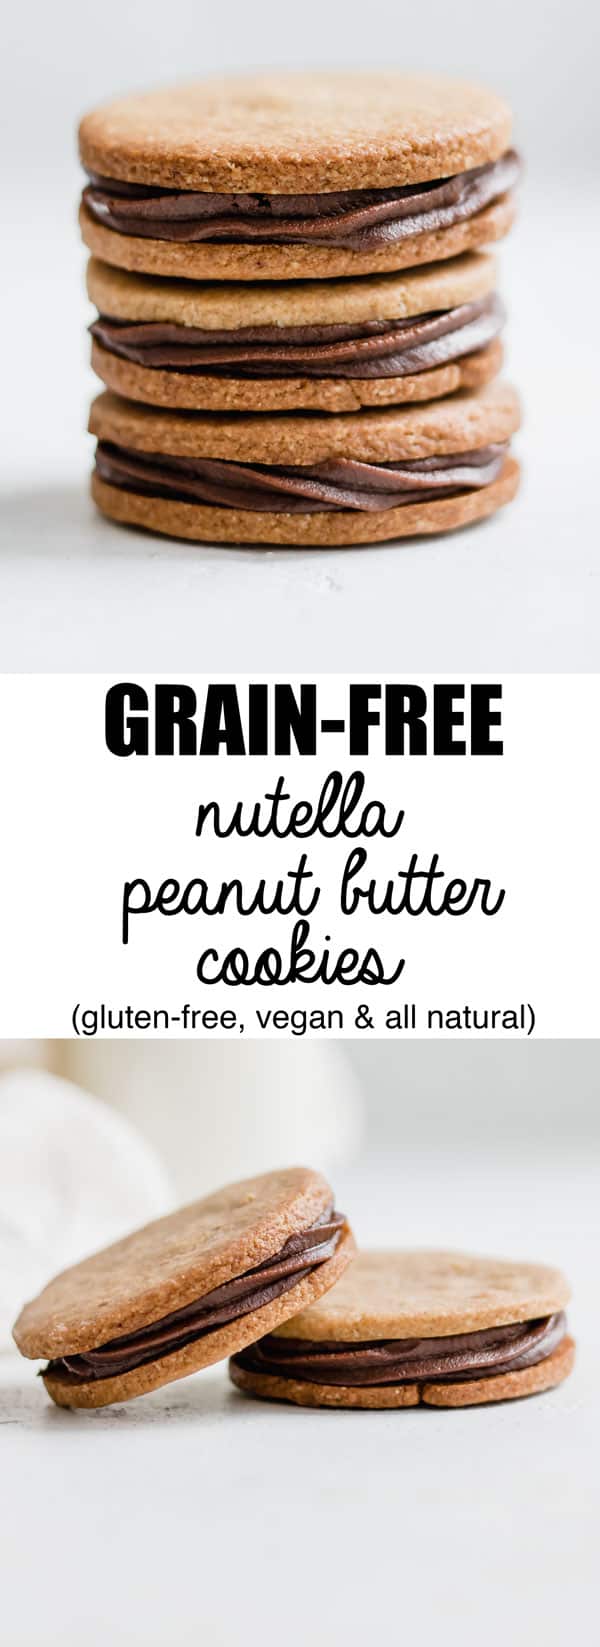 These grain-free nutella stuffed peanut butter cookies are healthy and made with all natural ingredients!